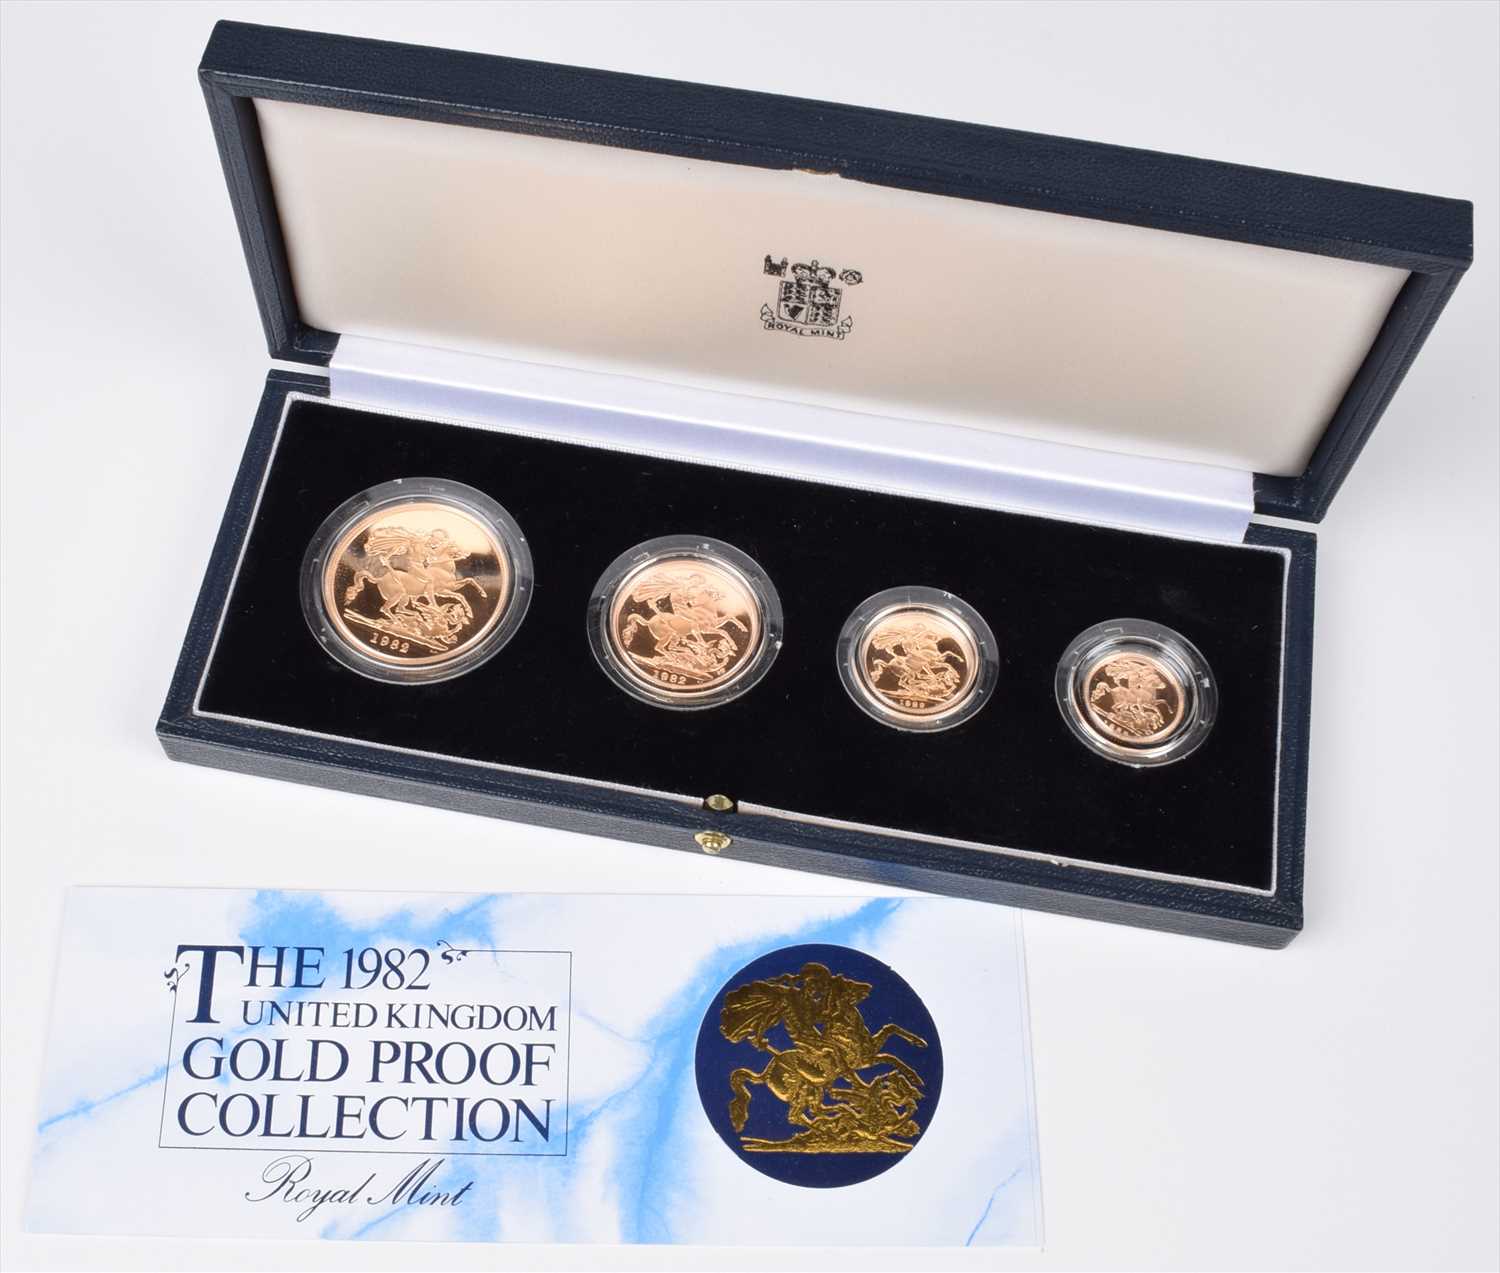 Lot 87 - Elizabeth II, United Kingdom, 1982, Gold Proof Four Coin Collection, Royal Mint.